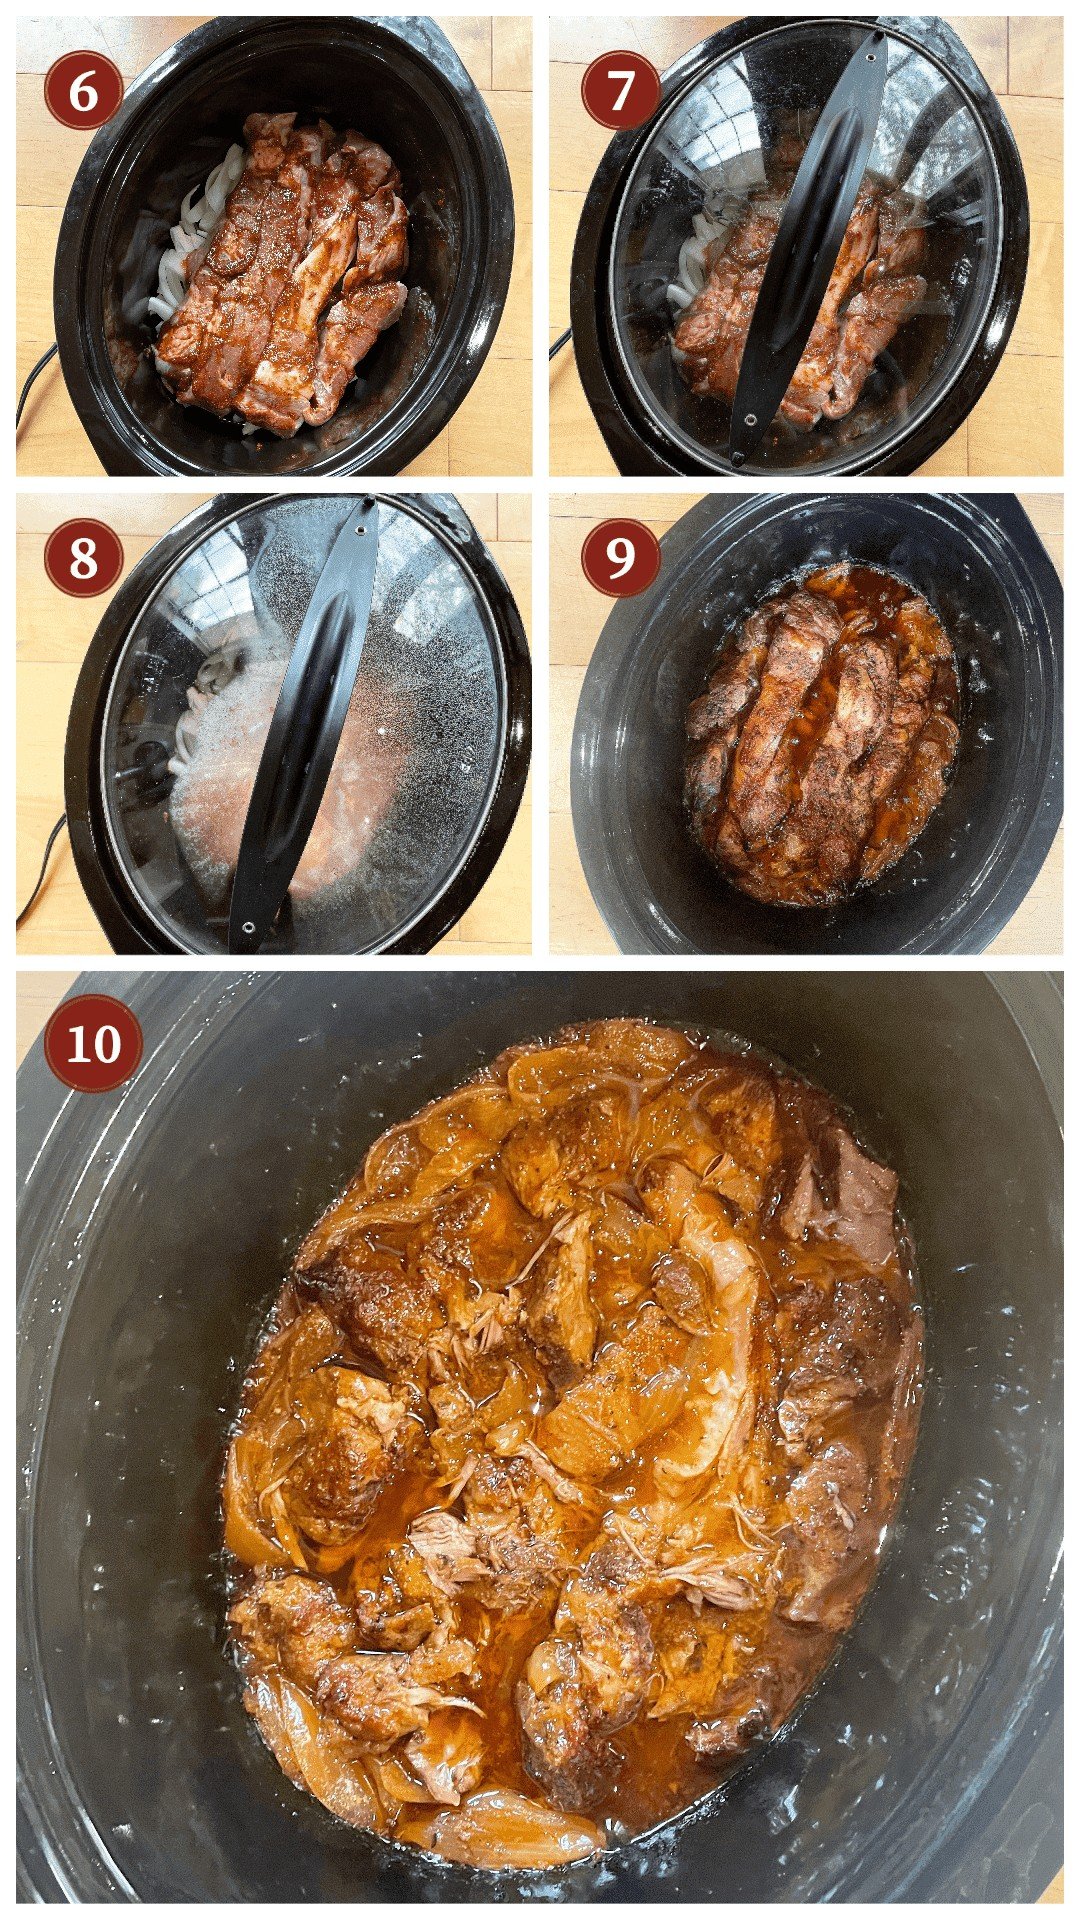 A collage of images showing how to make crock pot country style ribs, steps 6 - 10.